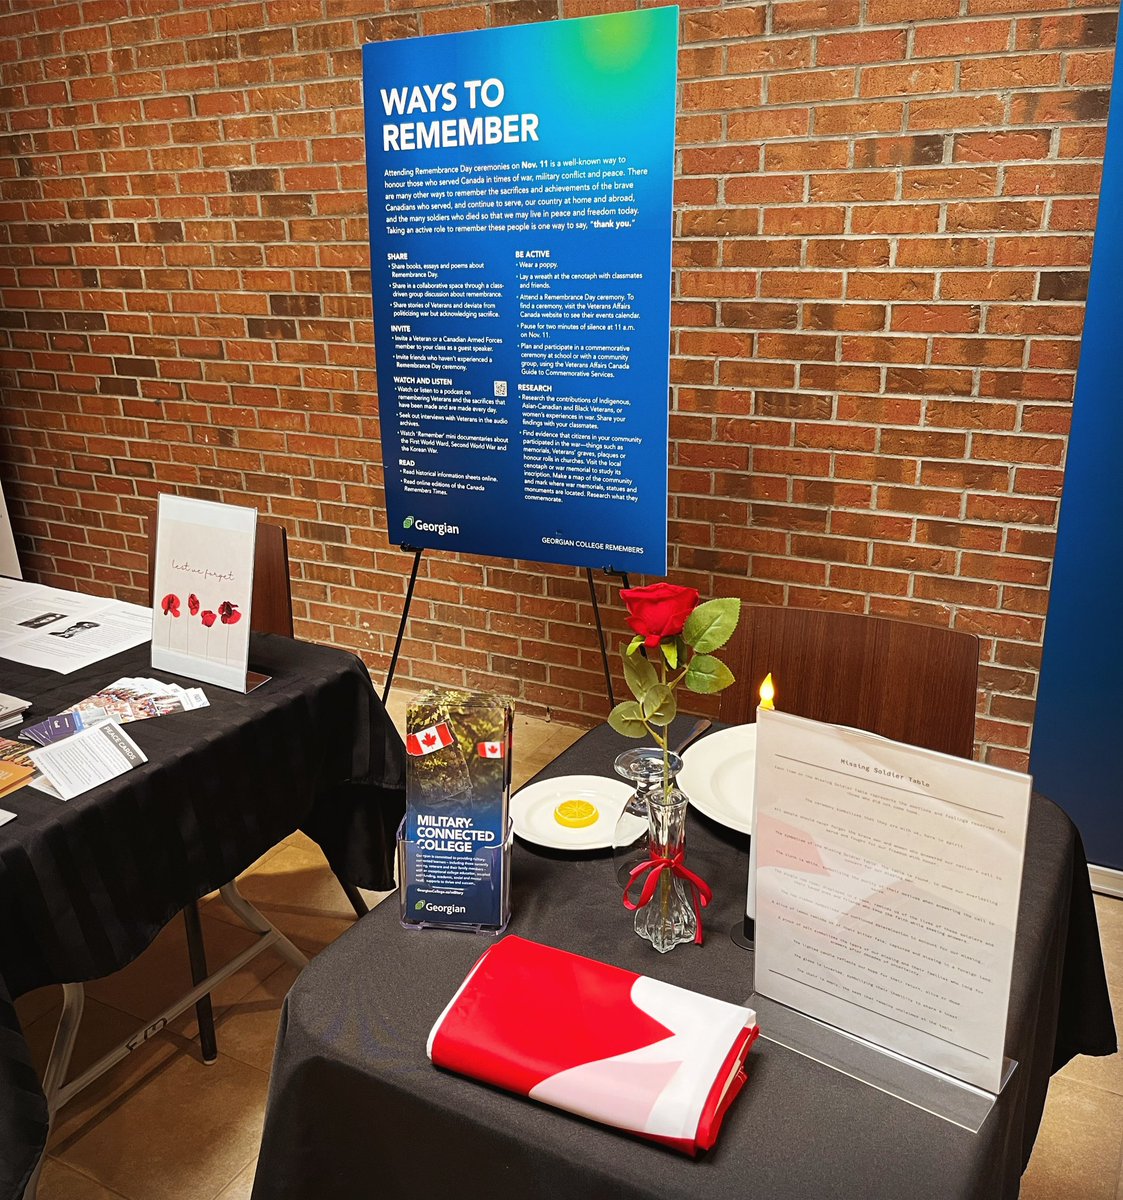 In an effort to advance our work as a Military Connected College during Remembrance Week, @georgiancollege has set up a Missing Soldier Table at each of our campuses. Each item is placed in honour of those who did not come home. #lestweforget #experiencegeorgian